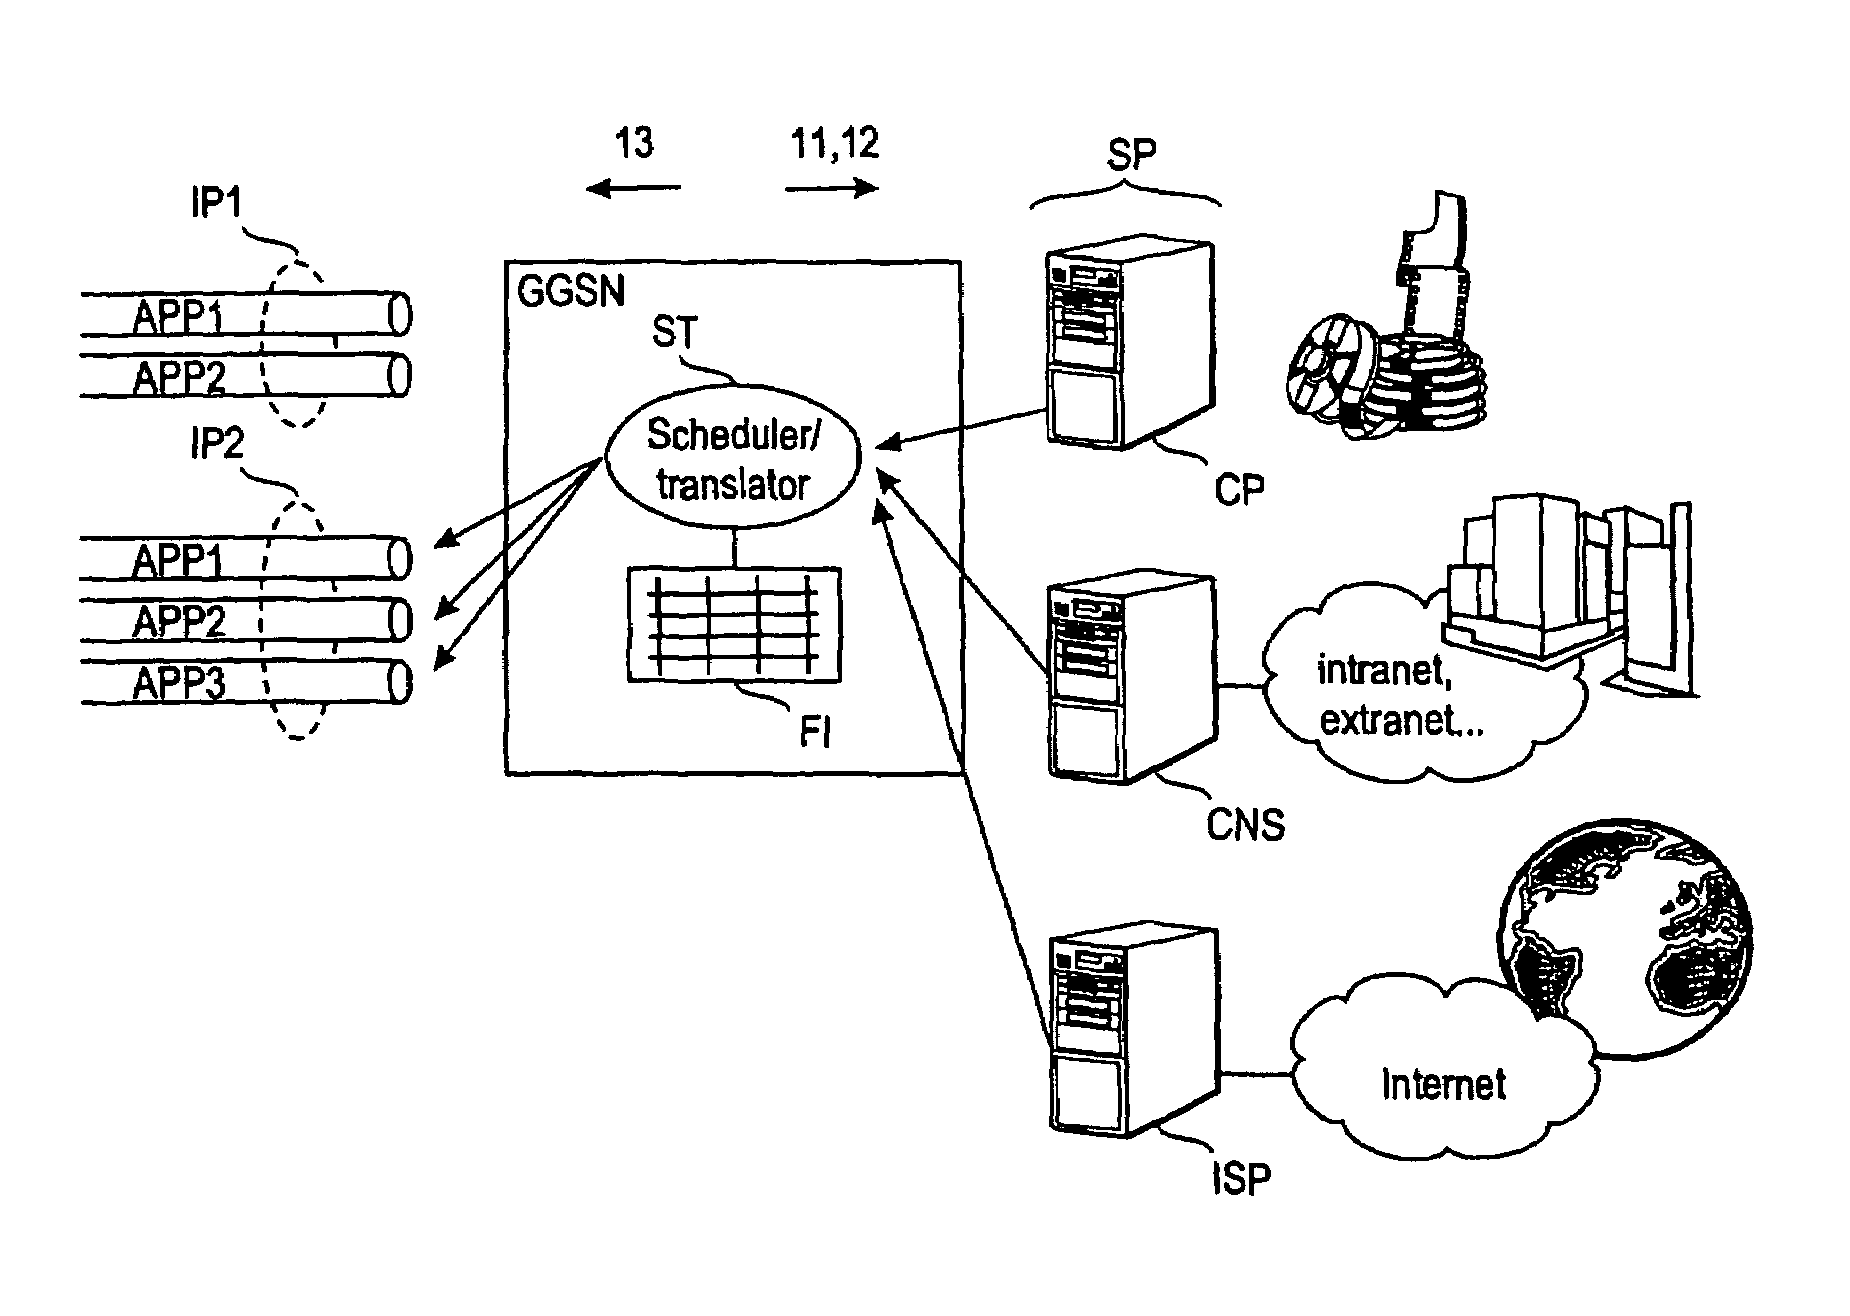 Transporting QoS mapping information in a packet radio network